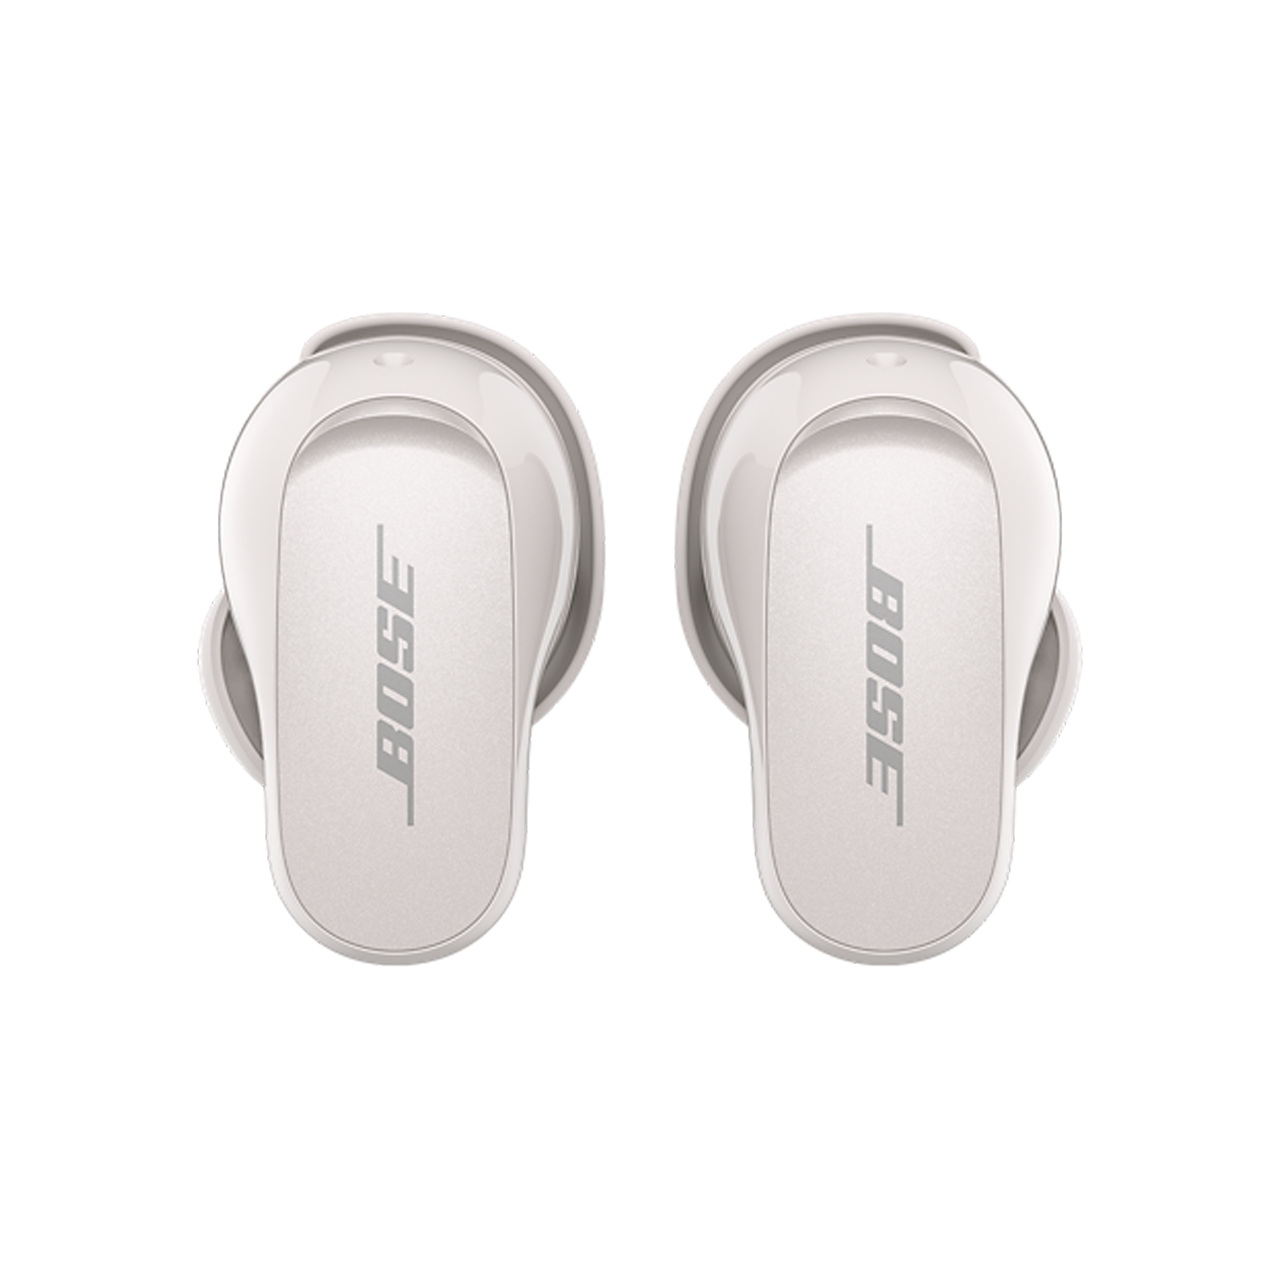 Bose QuietComfort Noise Cancelling Earbuds 2 - Soapstone White